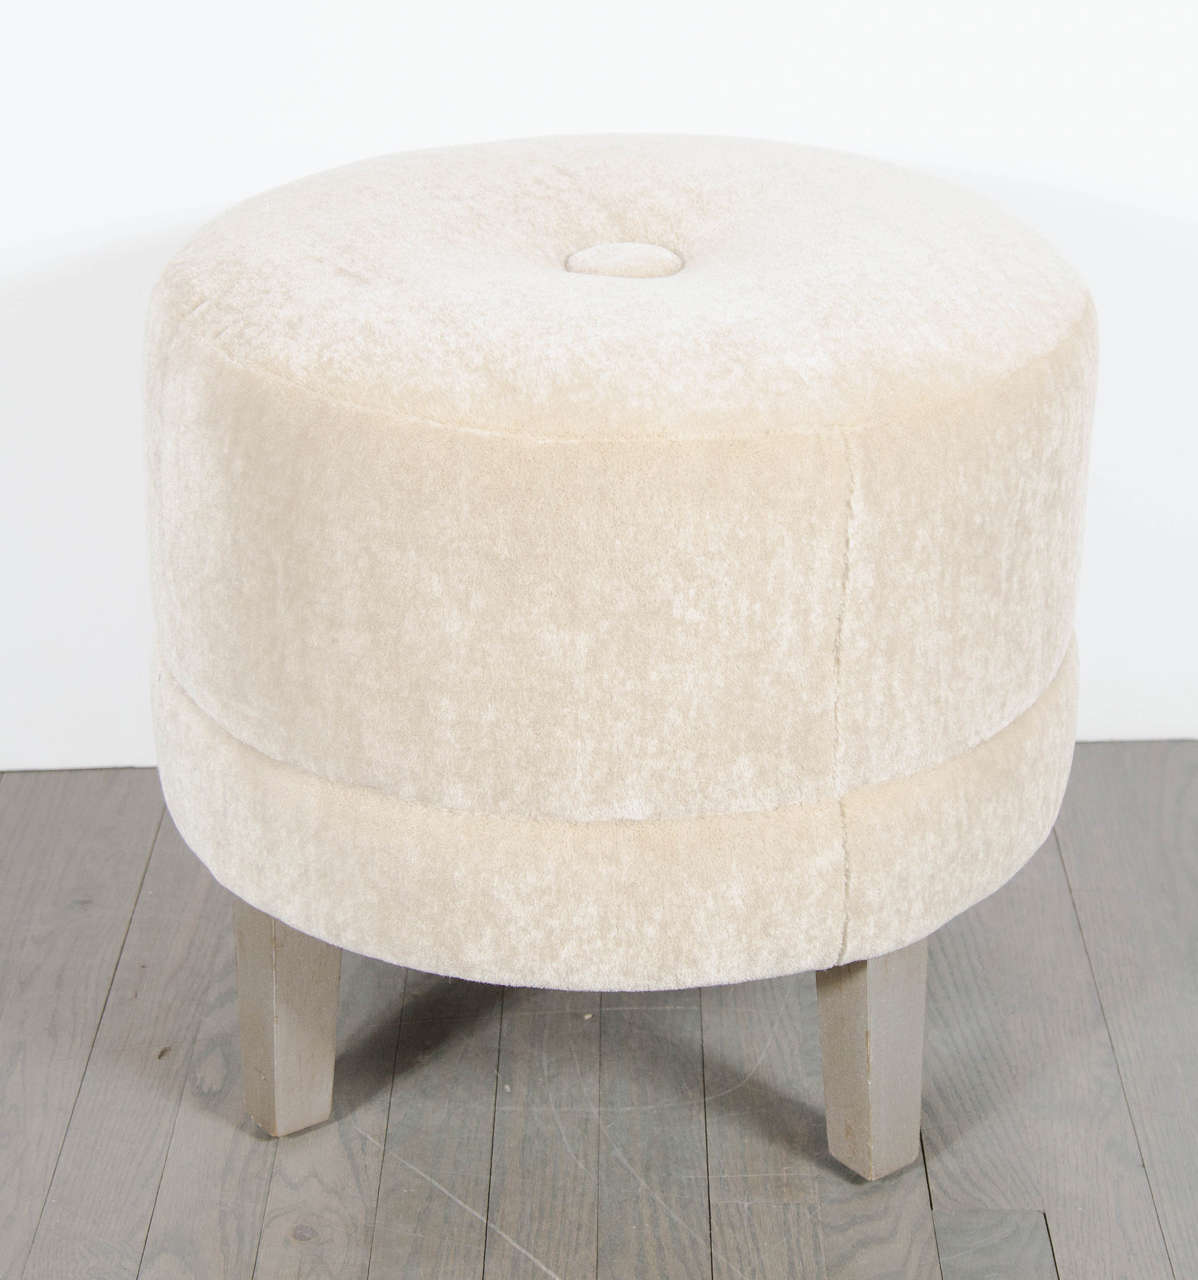 Art Deco round stool newly upholstered in camel mohair with a large button detail on the top seat. This stools height is accentuated with its overall tall design and the features an upholstered band that runs along the bottom acting as trim. It sits